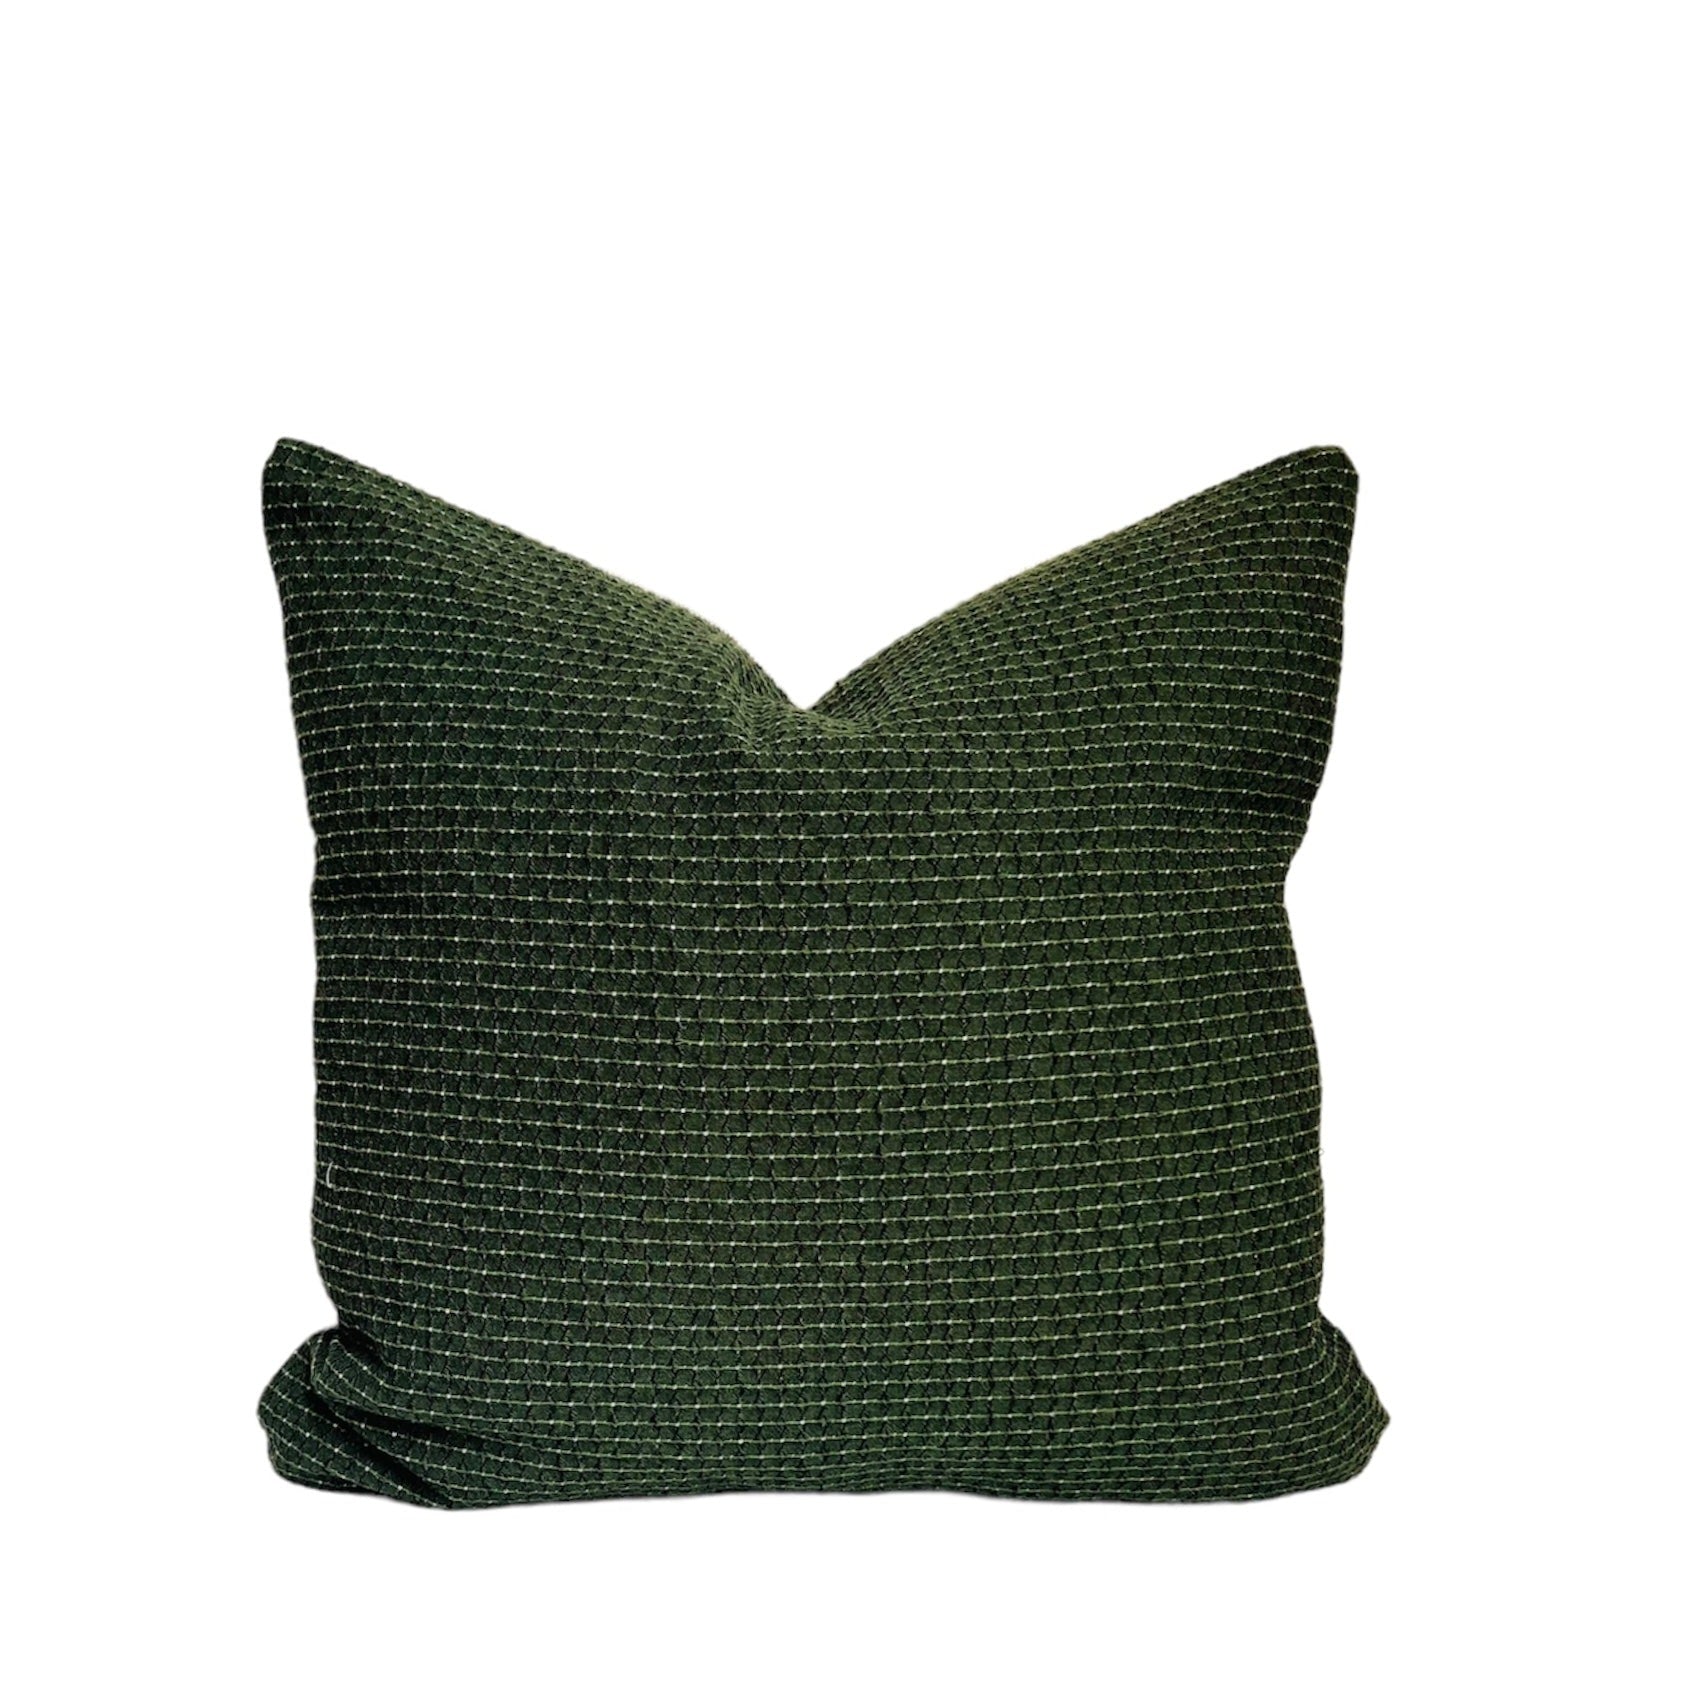 Decorative Pillows Cover Showroom Home Green Luxury Pillowcover - Warmly  Home